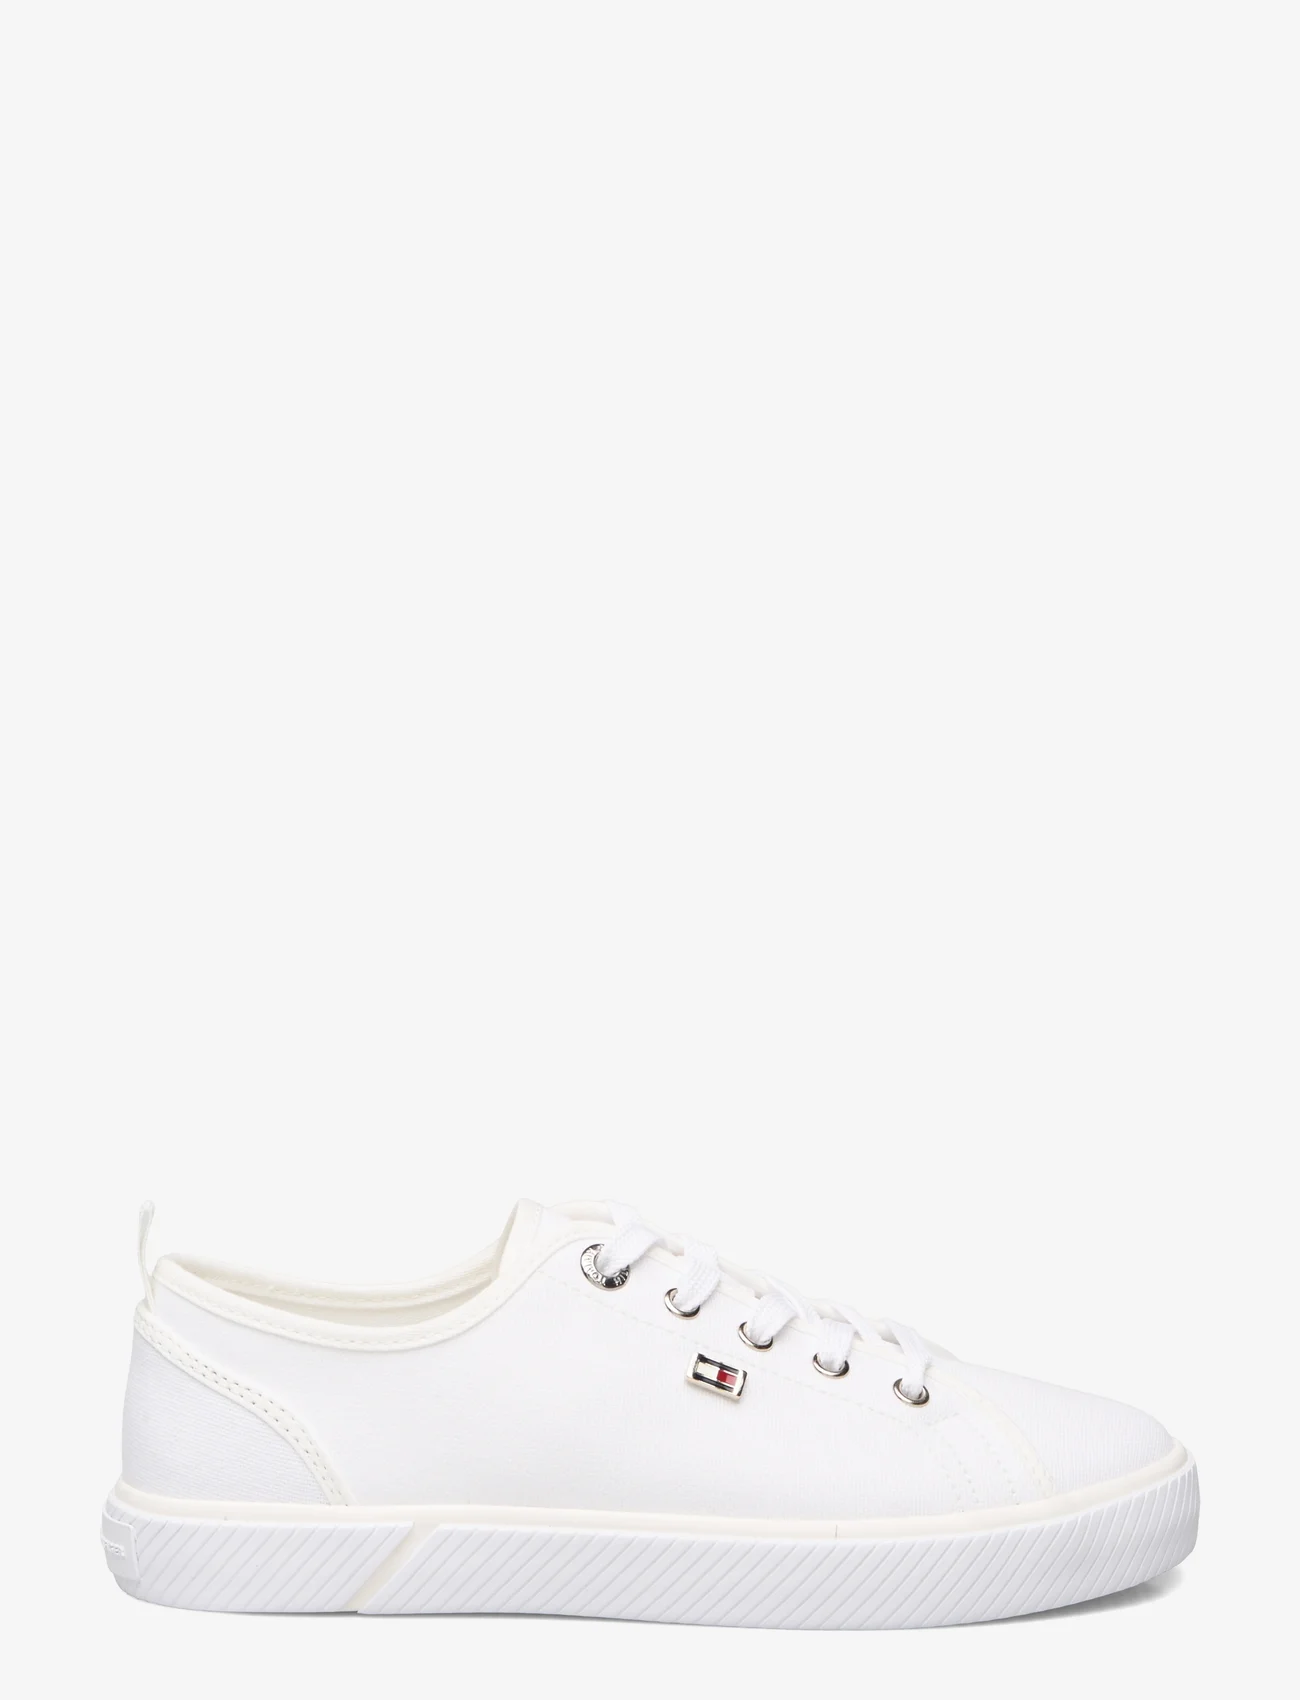 Tommy Hilfiger - VULC CANVAS SNEAKER - low top sneakers - white - 1